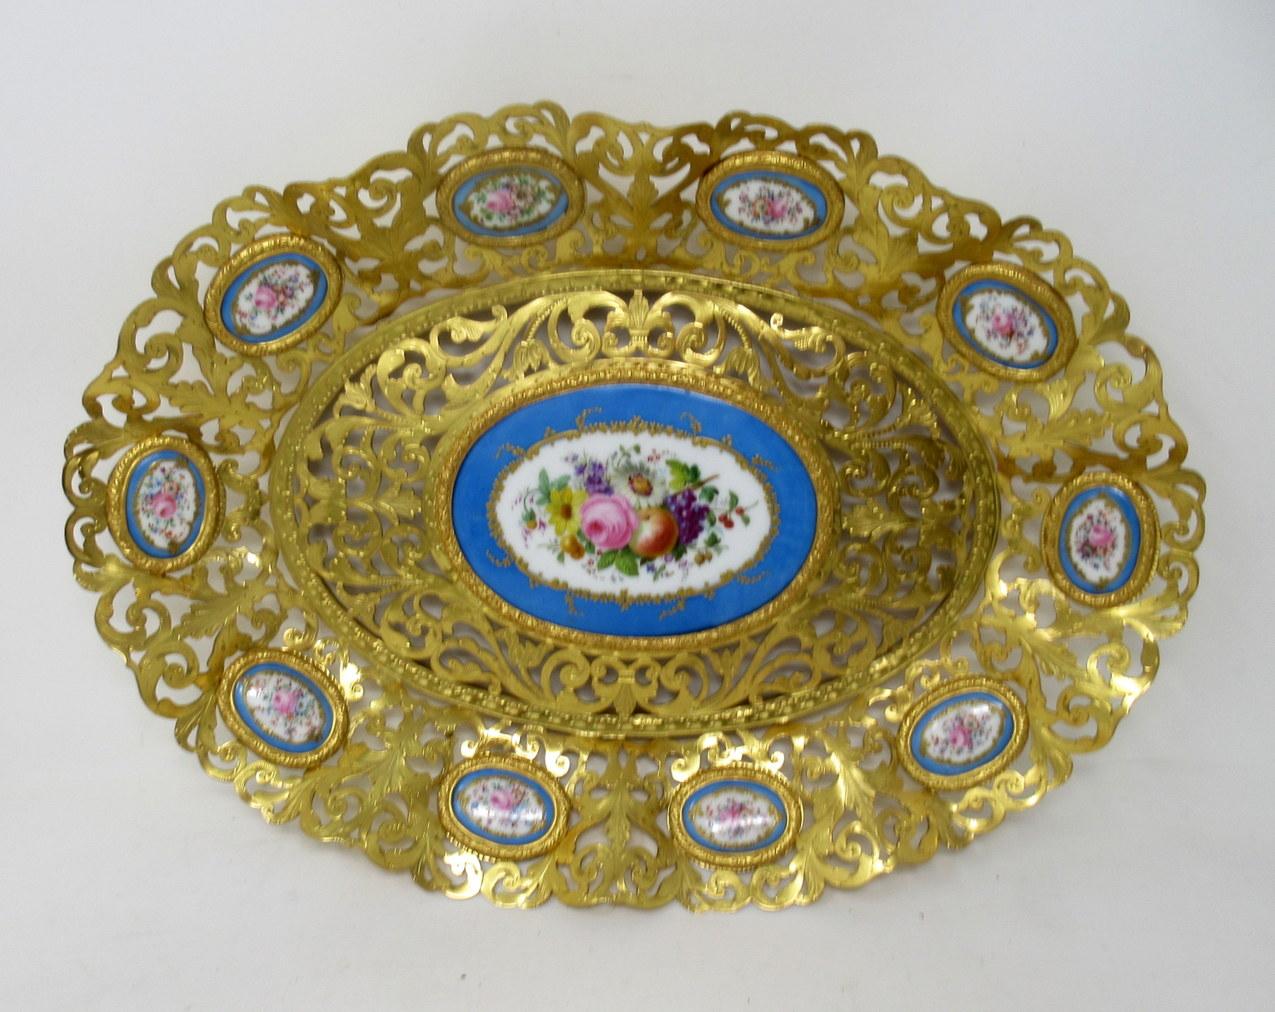 Stunning French gilt bronze table centerpiece or ladies dresser tray decorated with Sèvres soft paste porcelain hand painted inset medallions of outstanding quality, made during the last half of the 19th century

The main tray frame with a wide